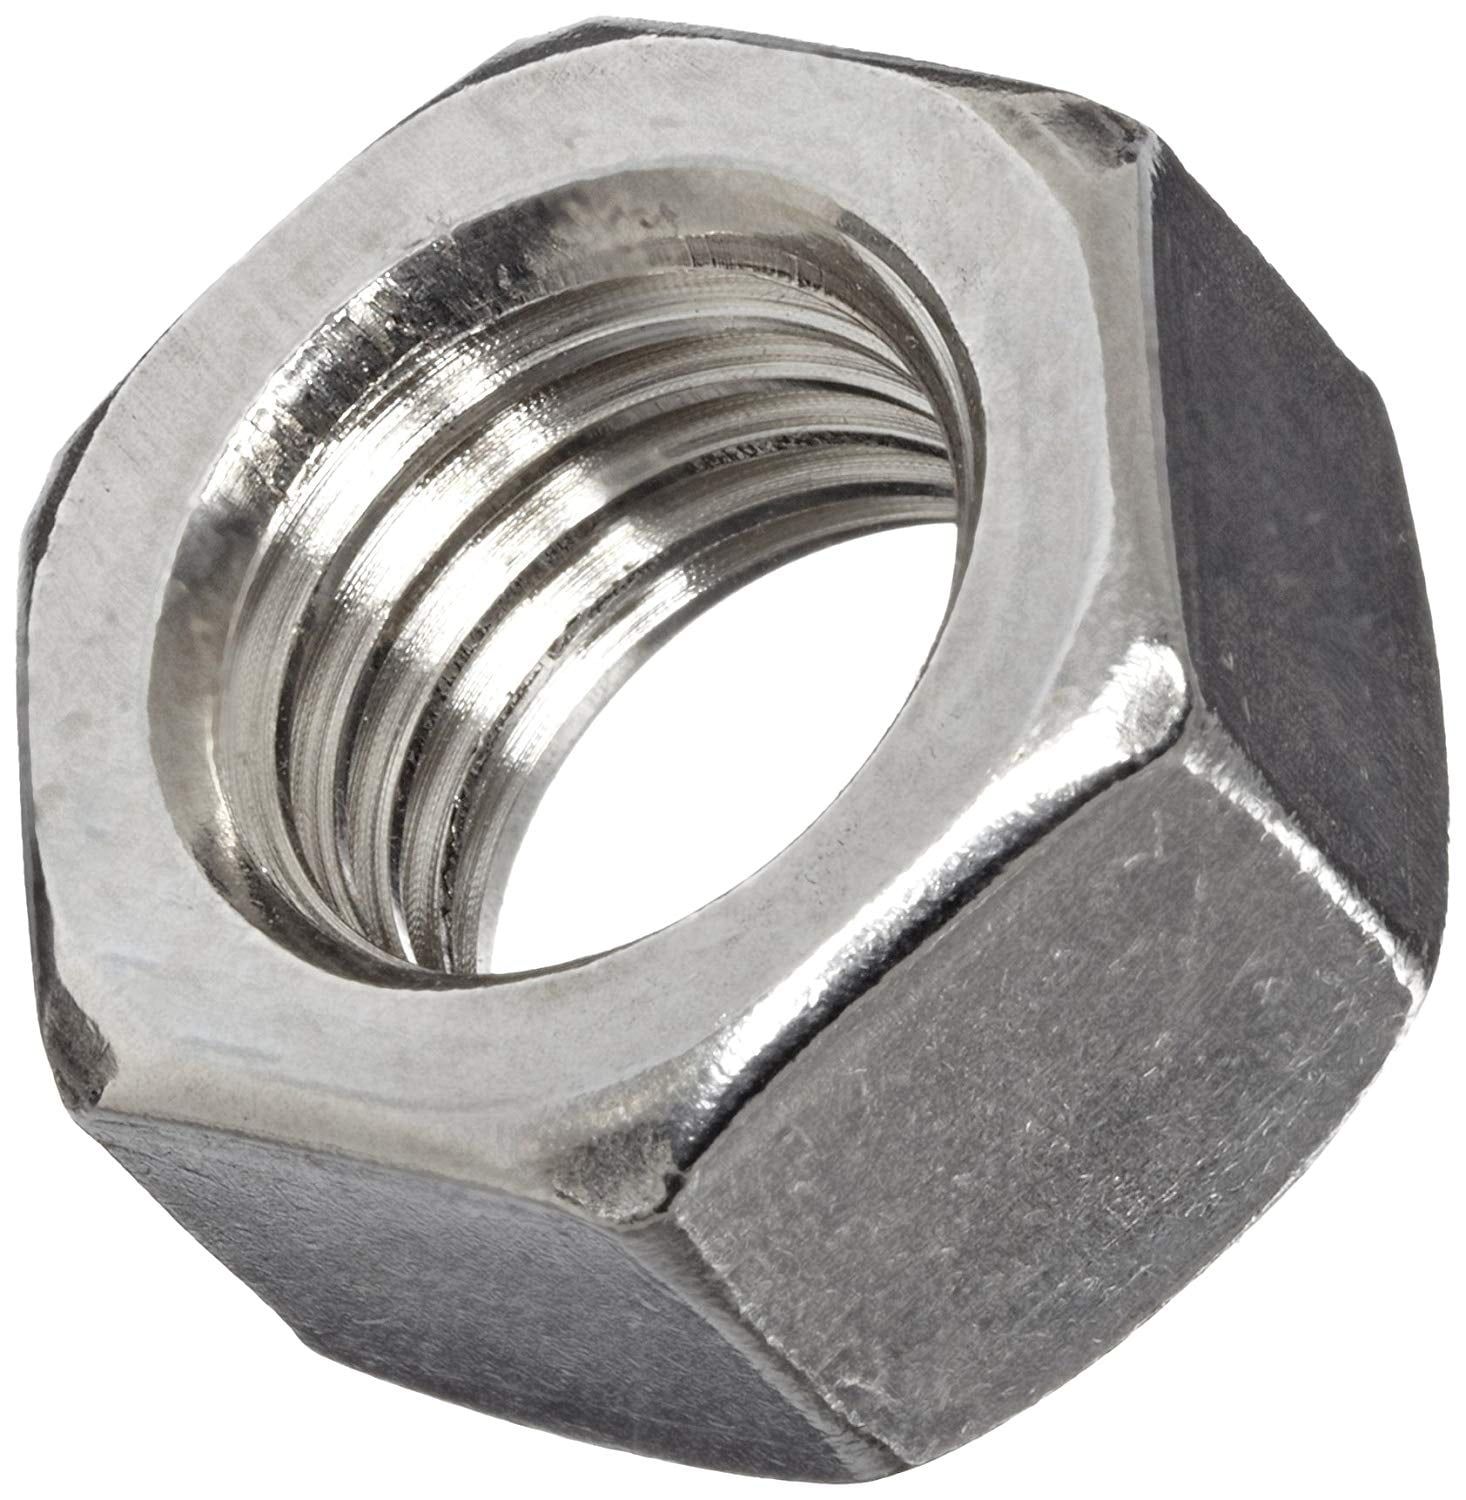 Stainless Steel 1/4"-20 Hex Nut 18/8 304 50 Pack 